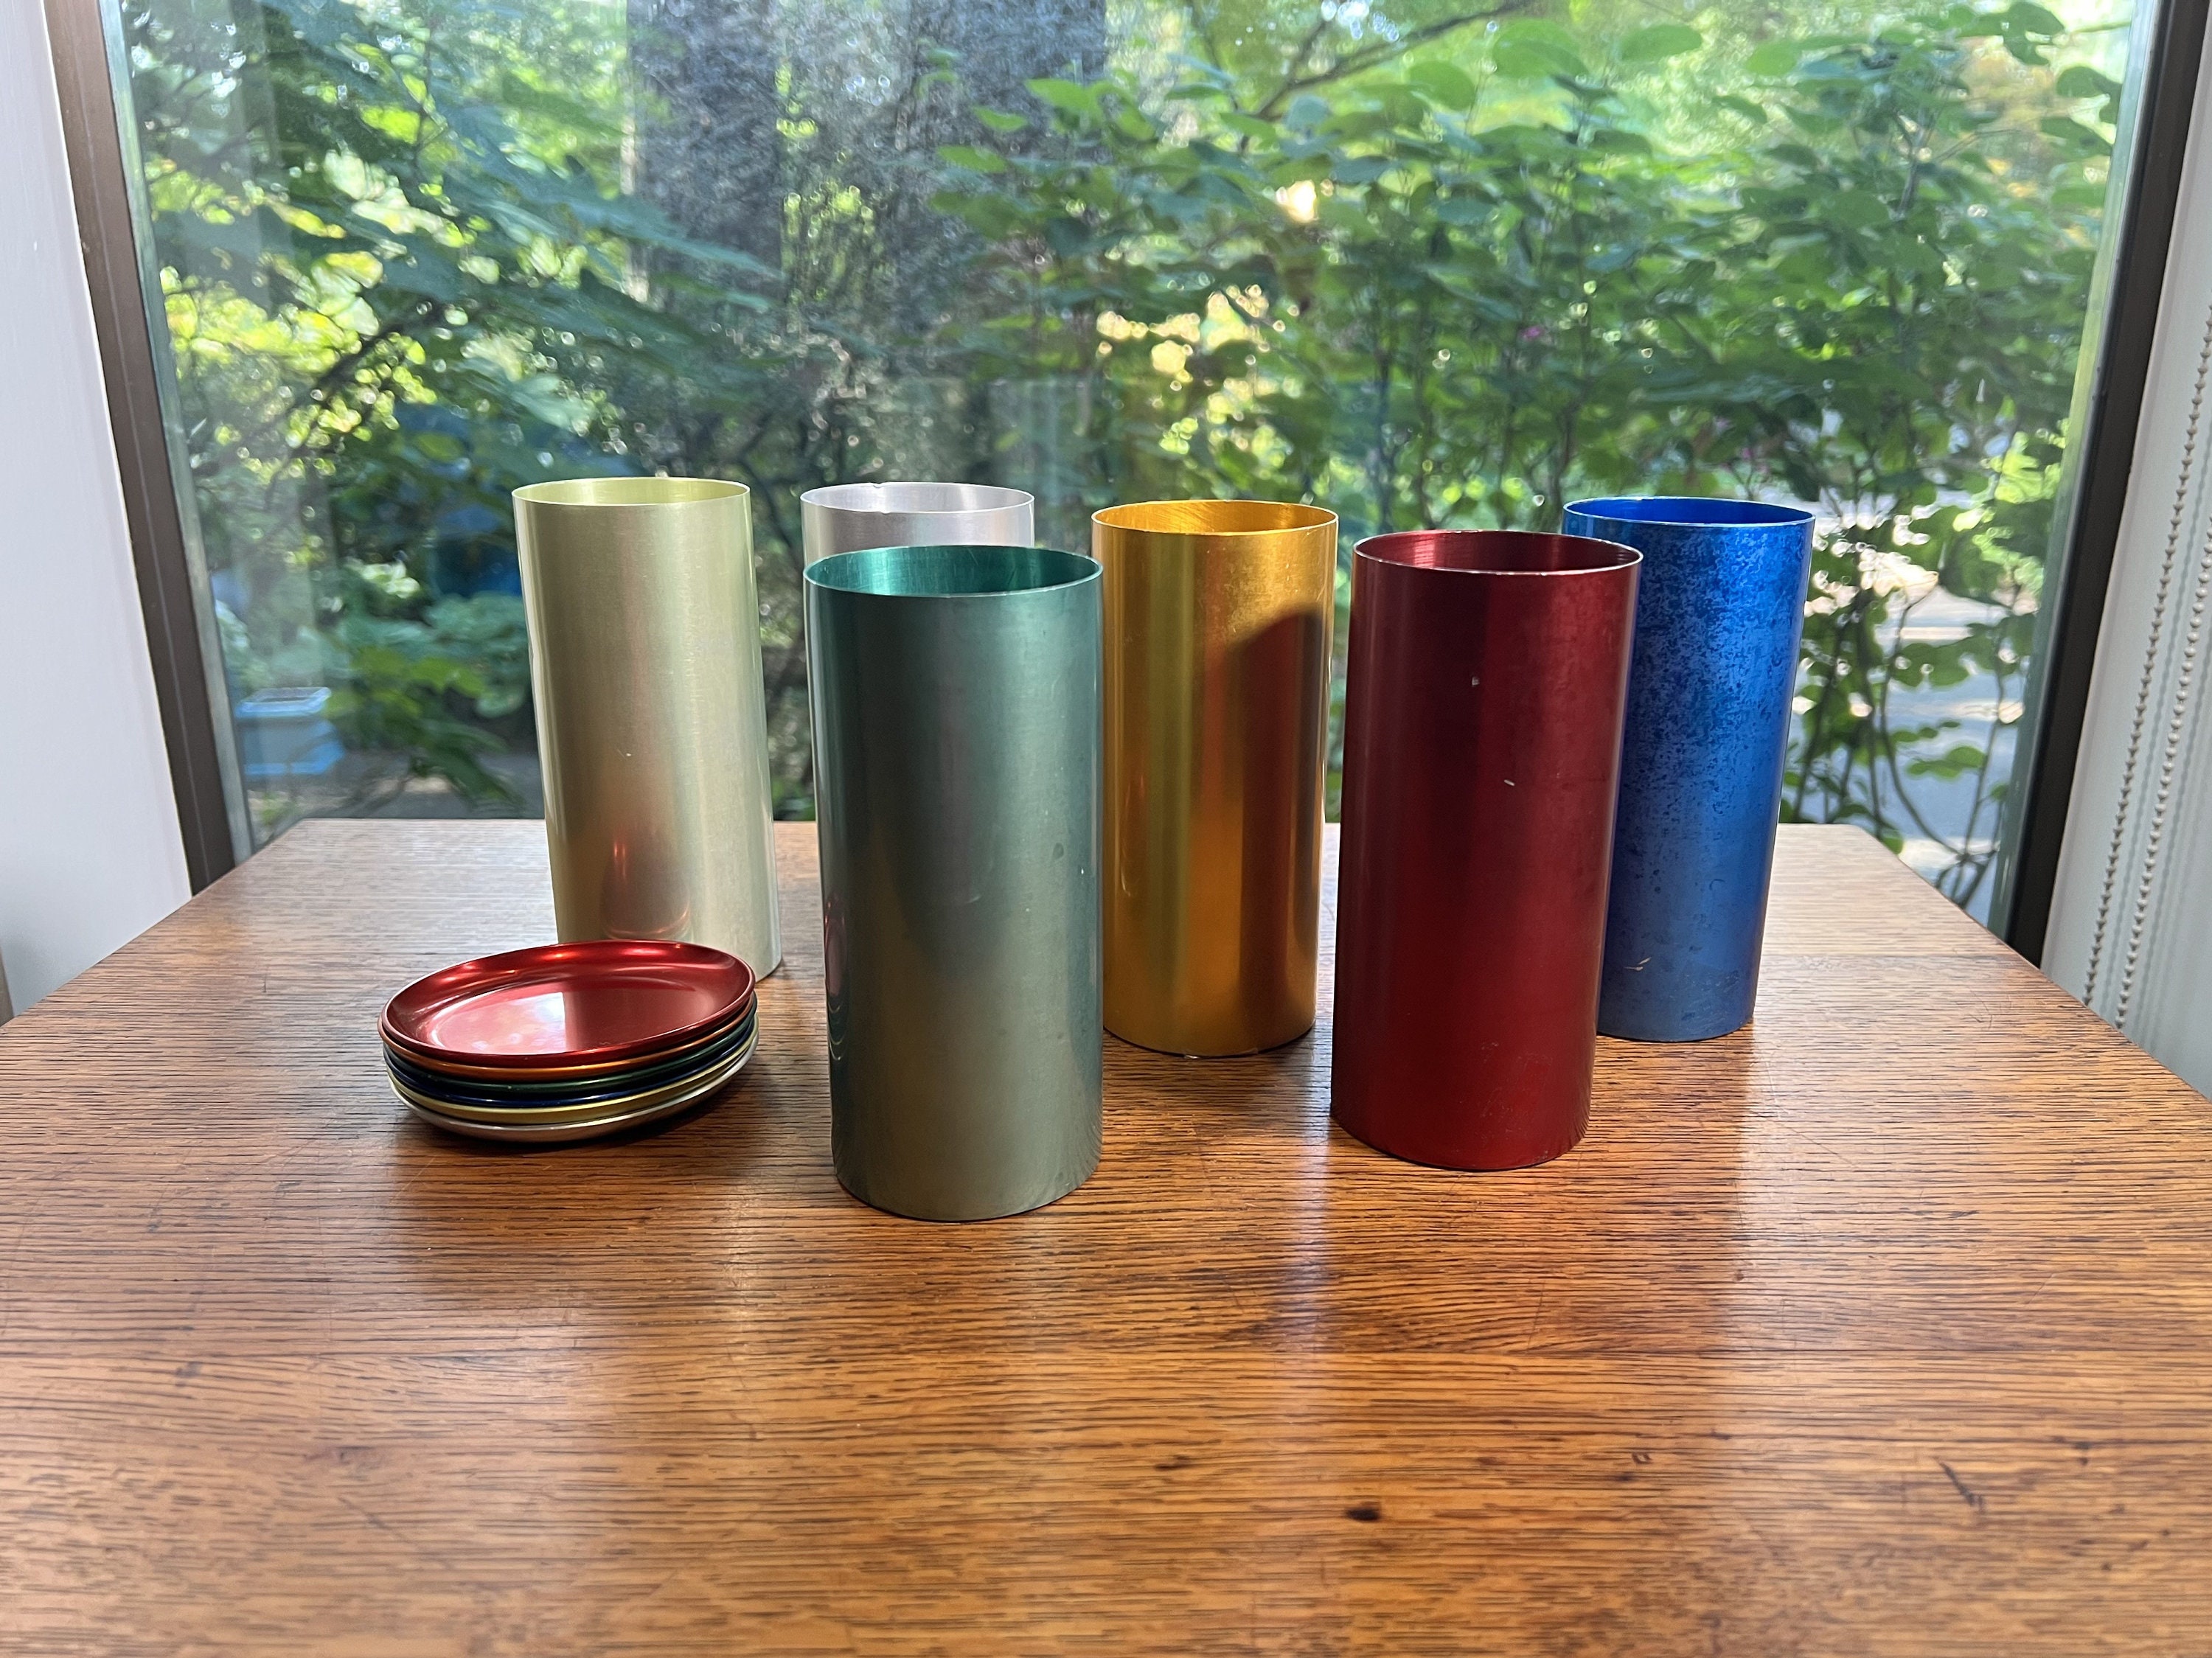 Set of 4 Vintage Green and Gold Anodized Aluminum Tumblers by Color Craft  Color Craft Tumblers Vintage Aluminum Tumbler Set Picnic Cup 